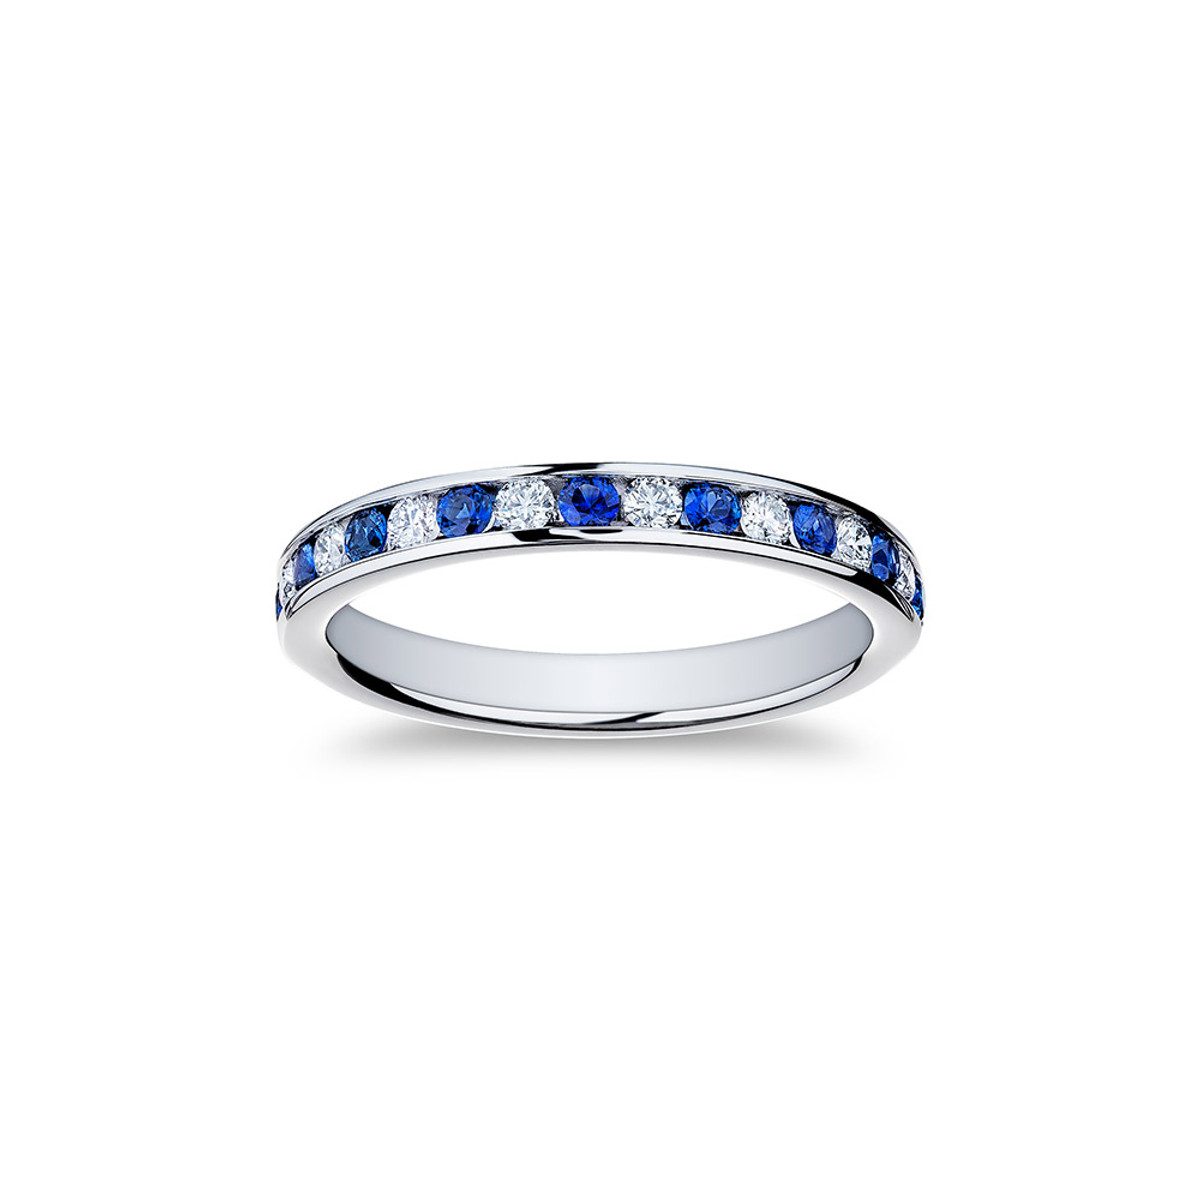 18KW DIAMOND AND SAPPHIRE BAND D=0.22CTTW SAPPHIRE=0.30CTTW-43304 Product Image